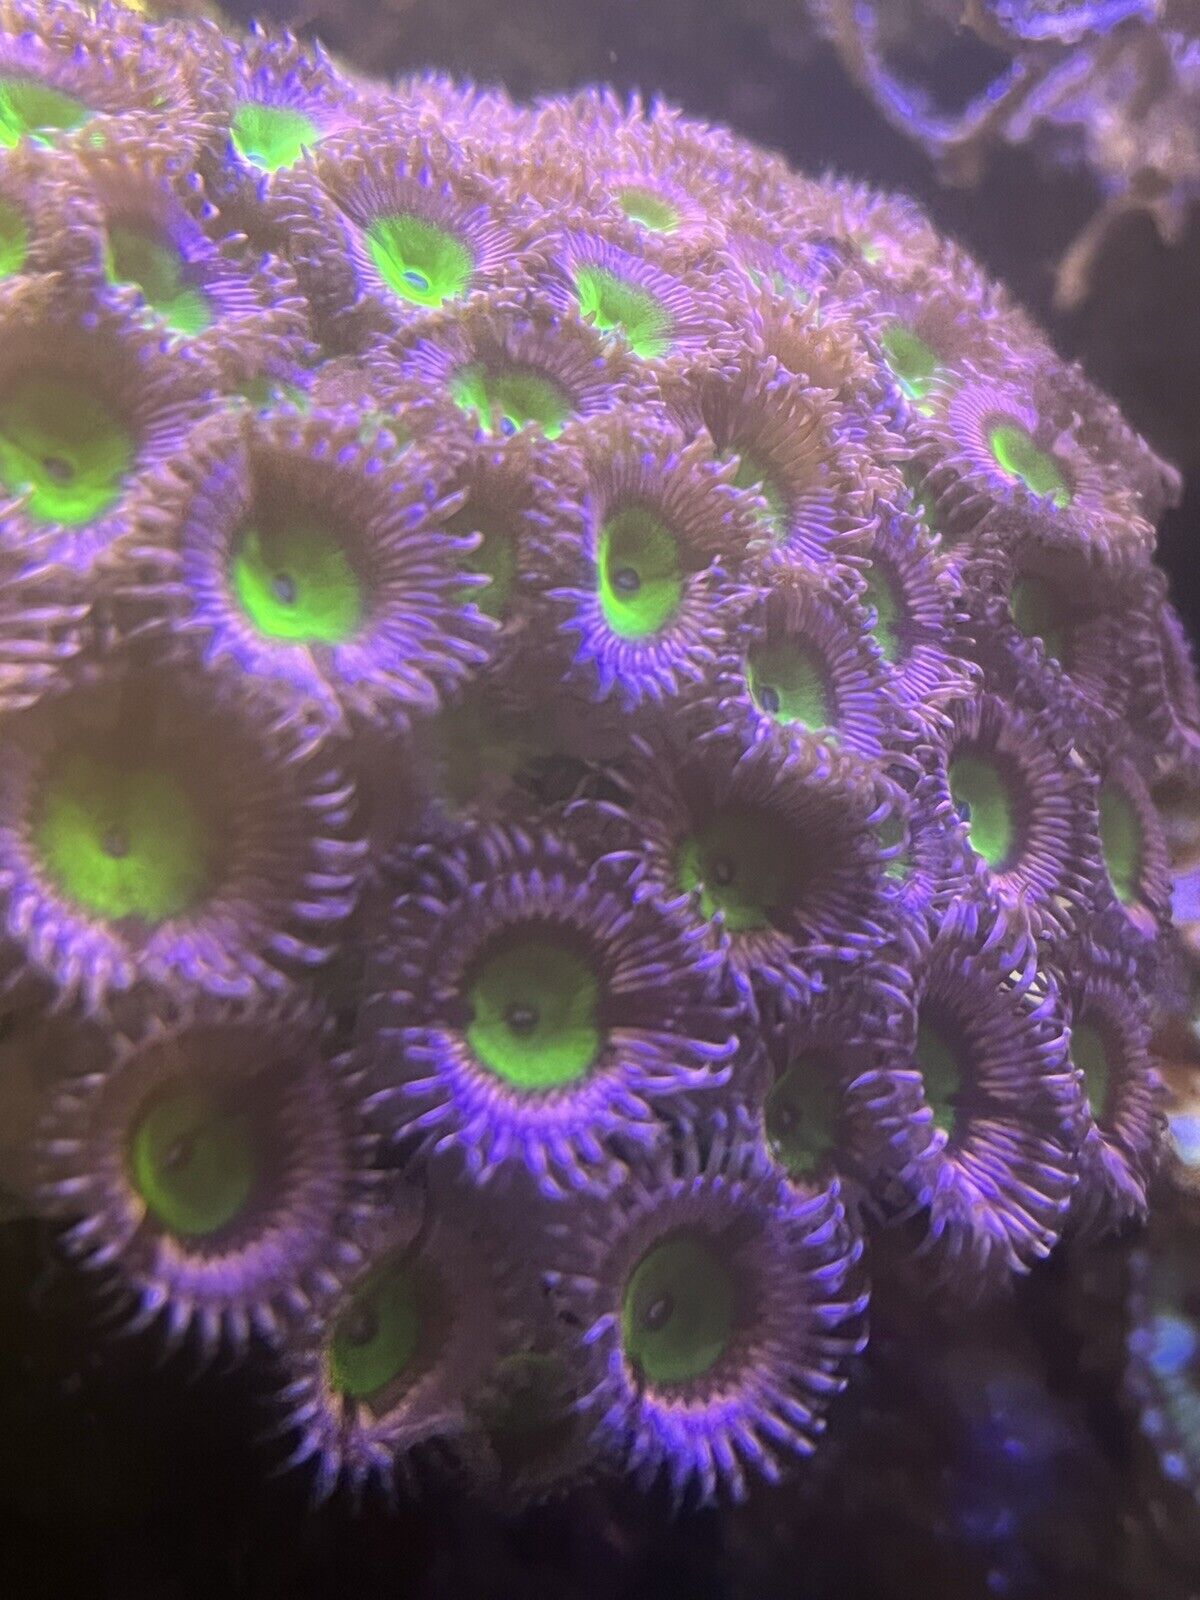 Pink Hippo / Chuckies Bride Zoa Frag 3+ Polyp And Small Colony Of 30+